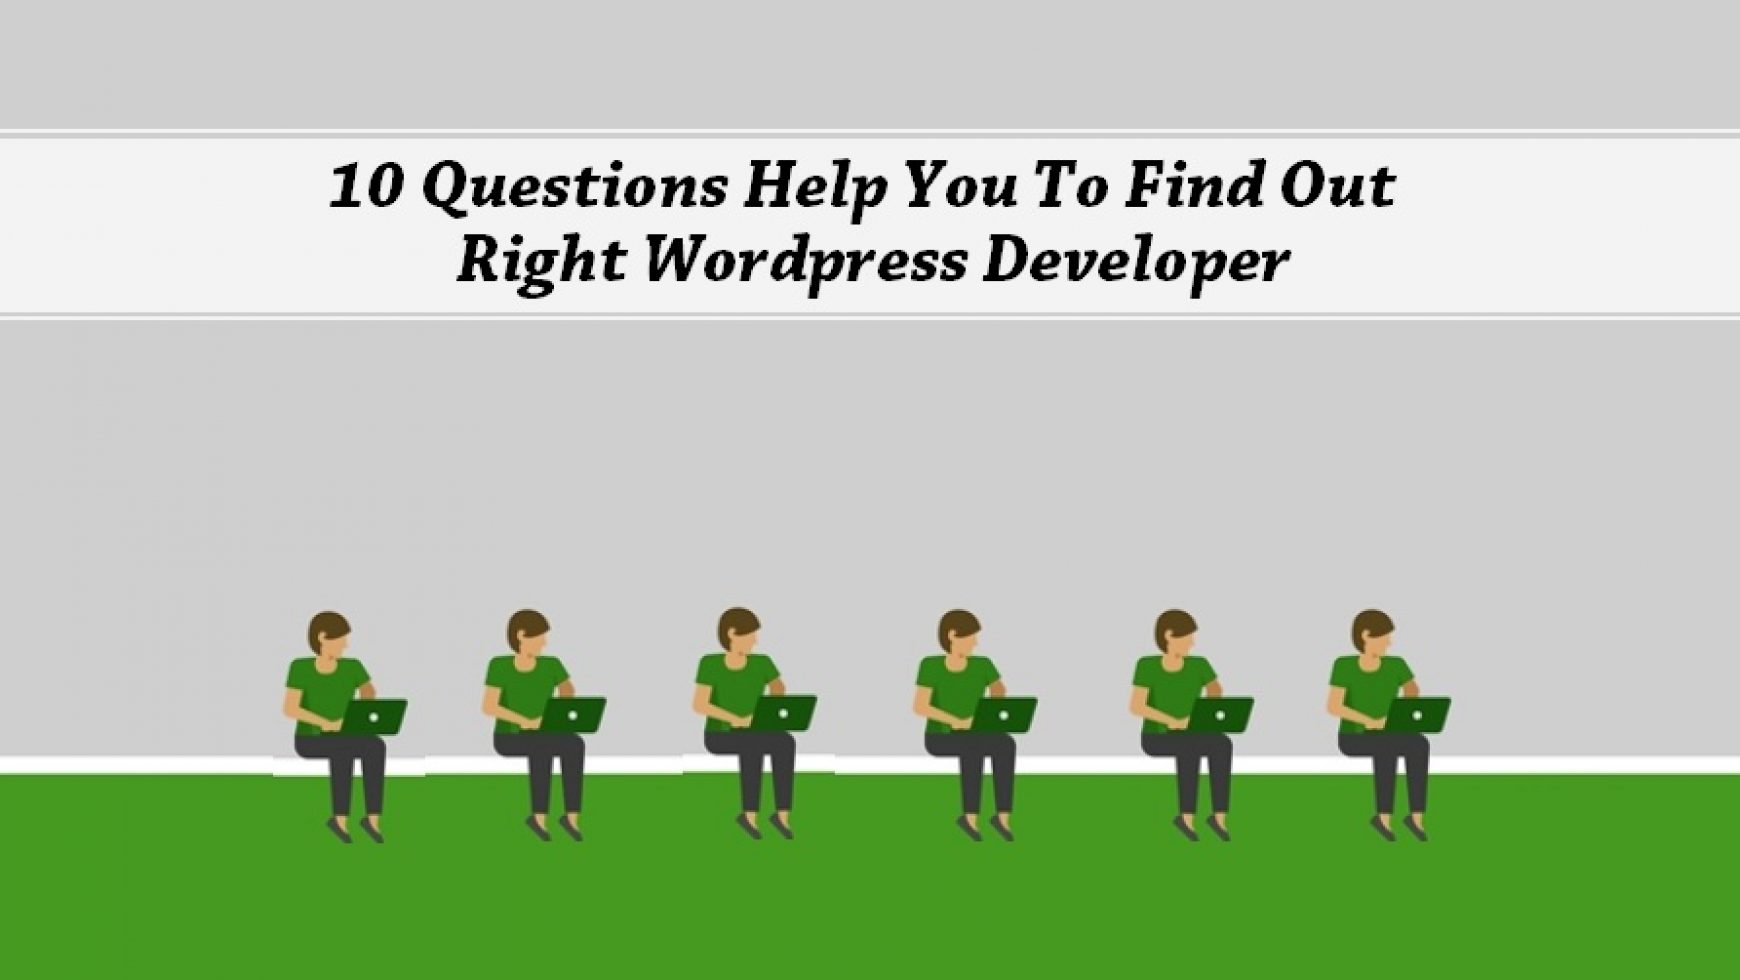 10 Questions Help You To Find Out Right WordPress Developer